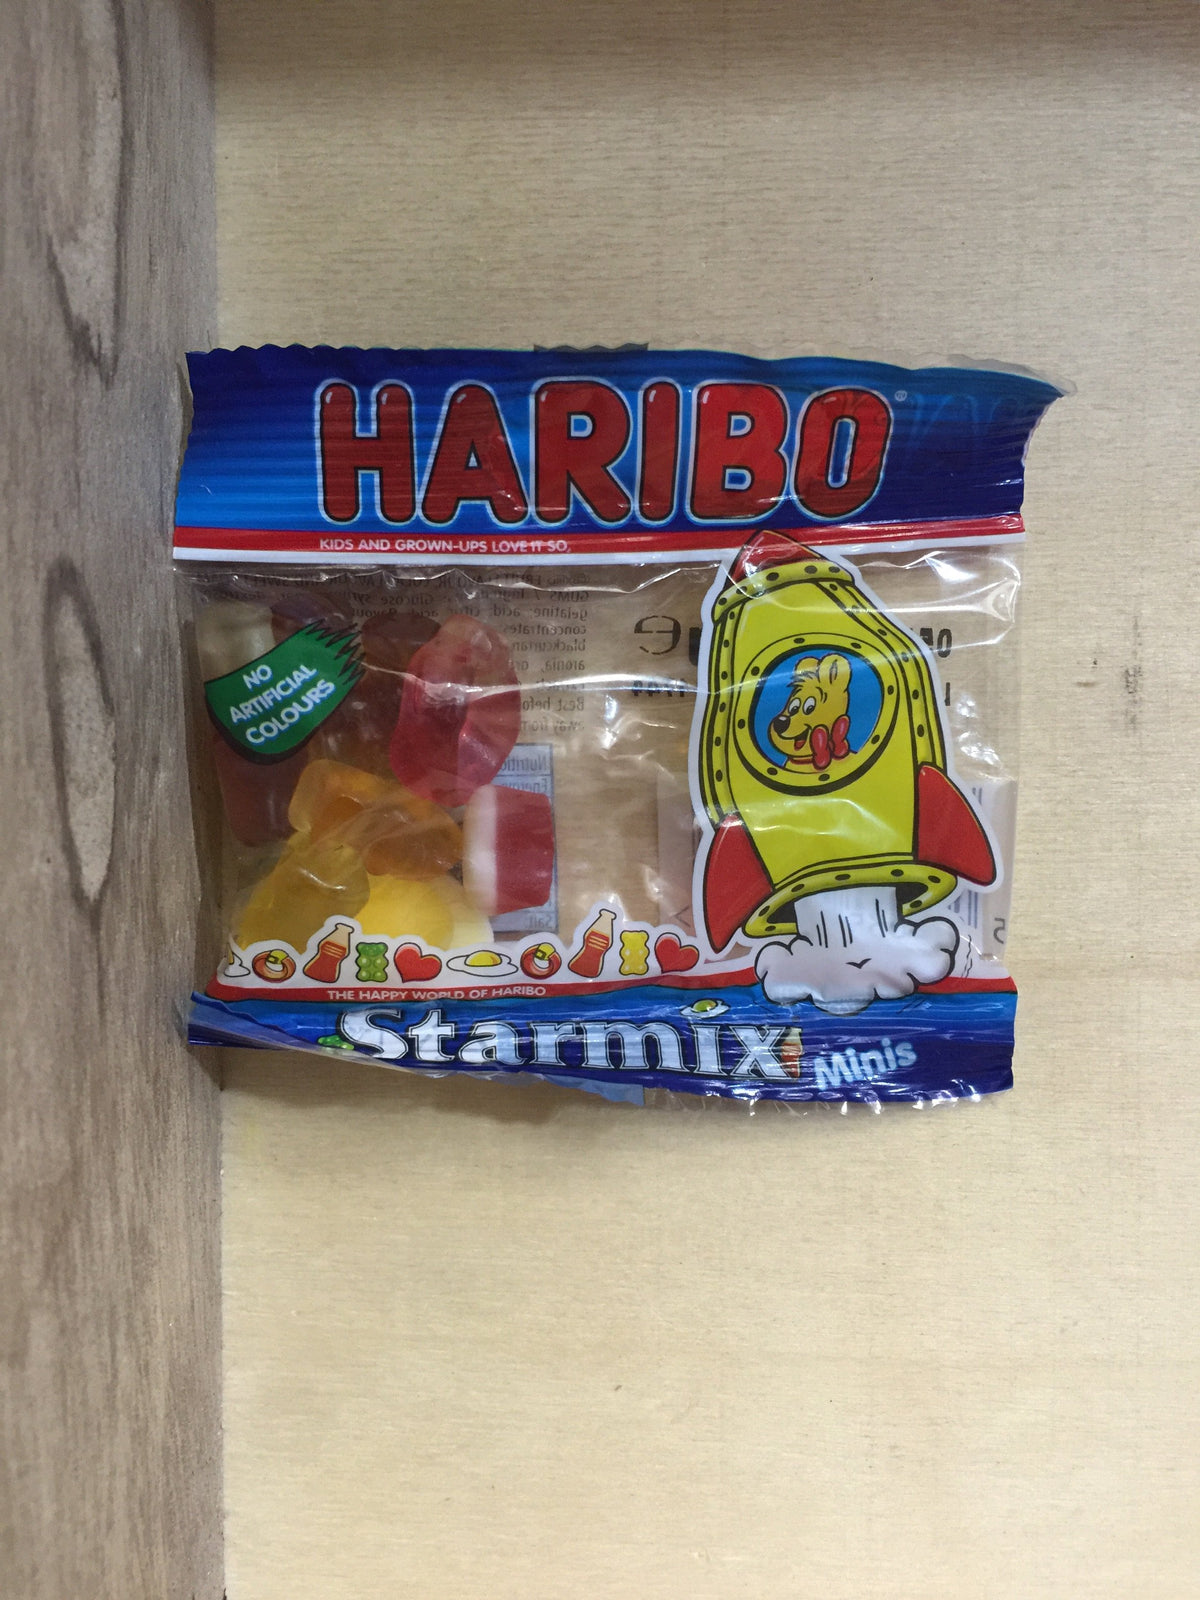 Haribo Starmix Minis 16g Haribo Check us out on Facebook! We have what  you're searching for